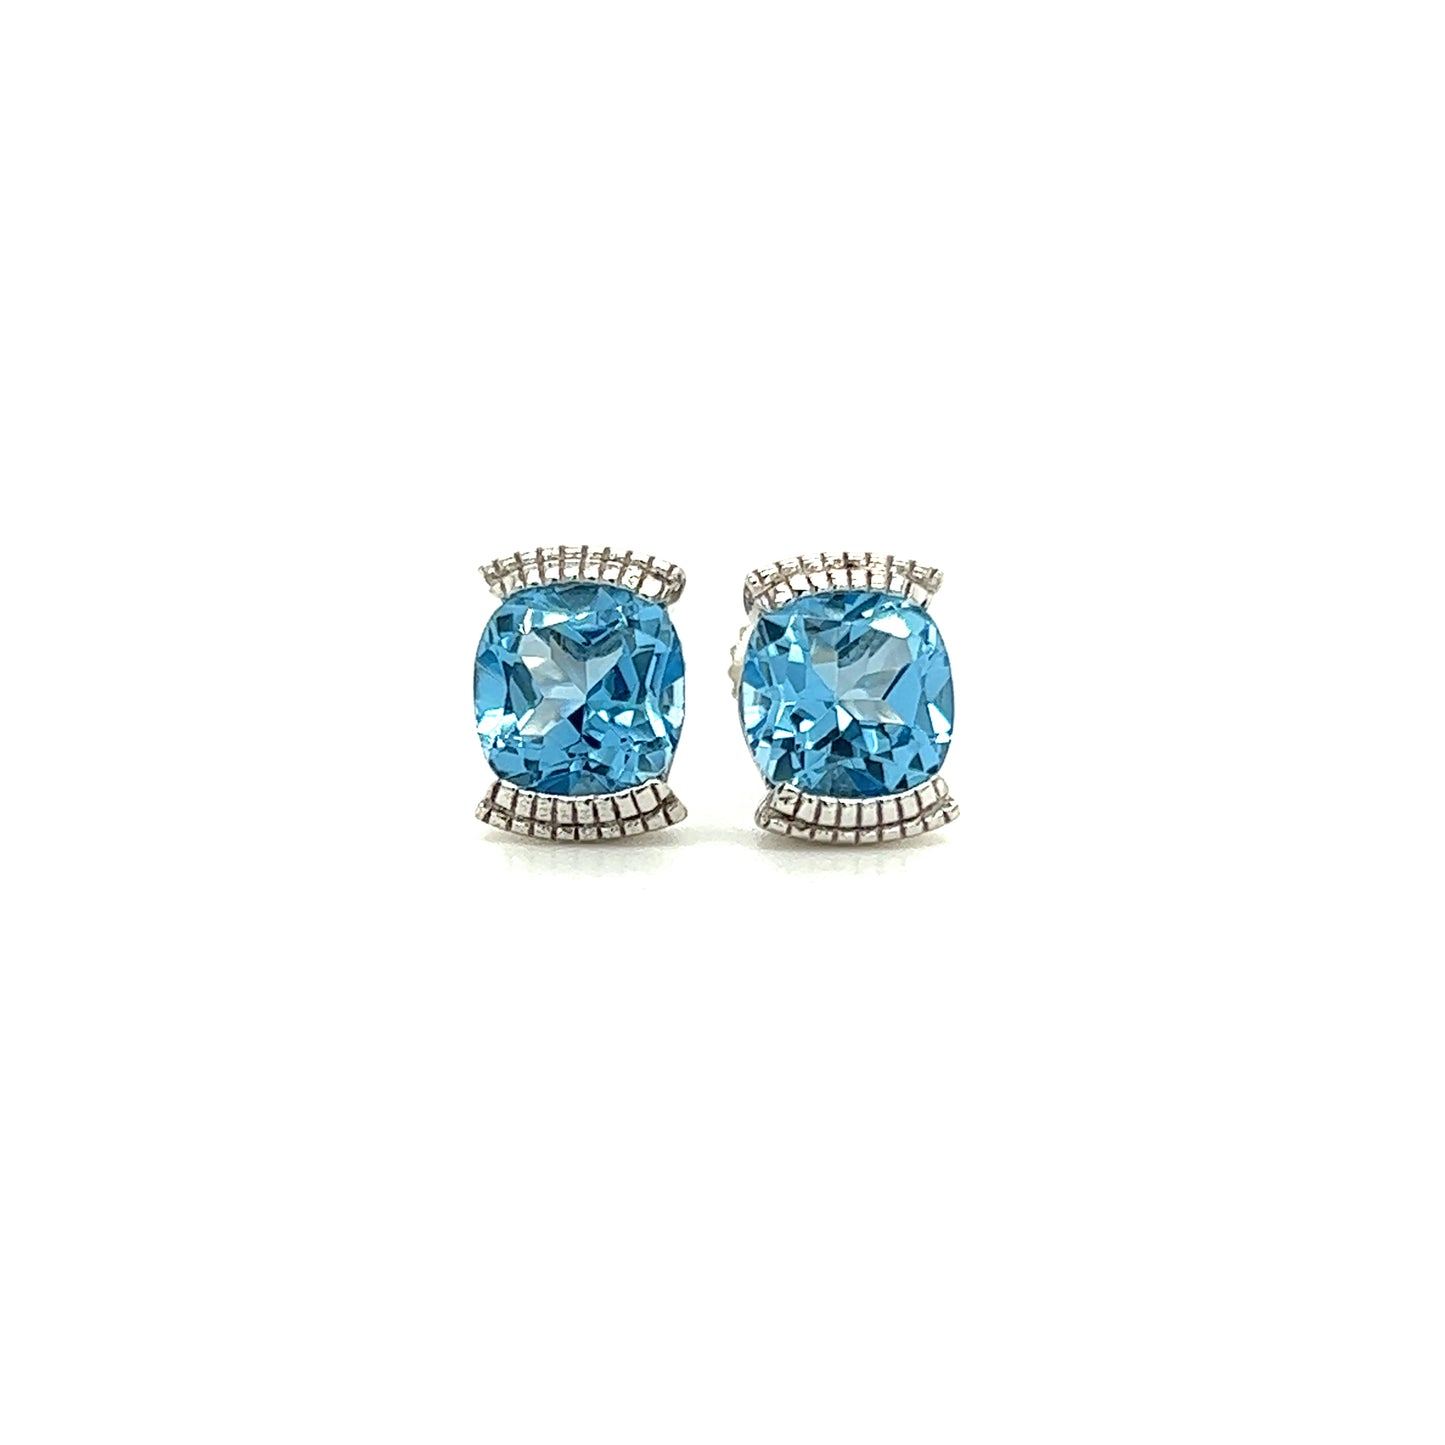 Cushion Blue Topaz Stud Earrings with 1.78ctw of Swiss Blue Topaz in 14K White Gold Front View